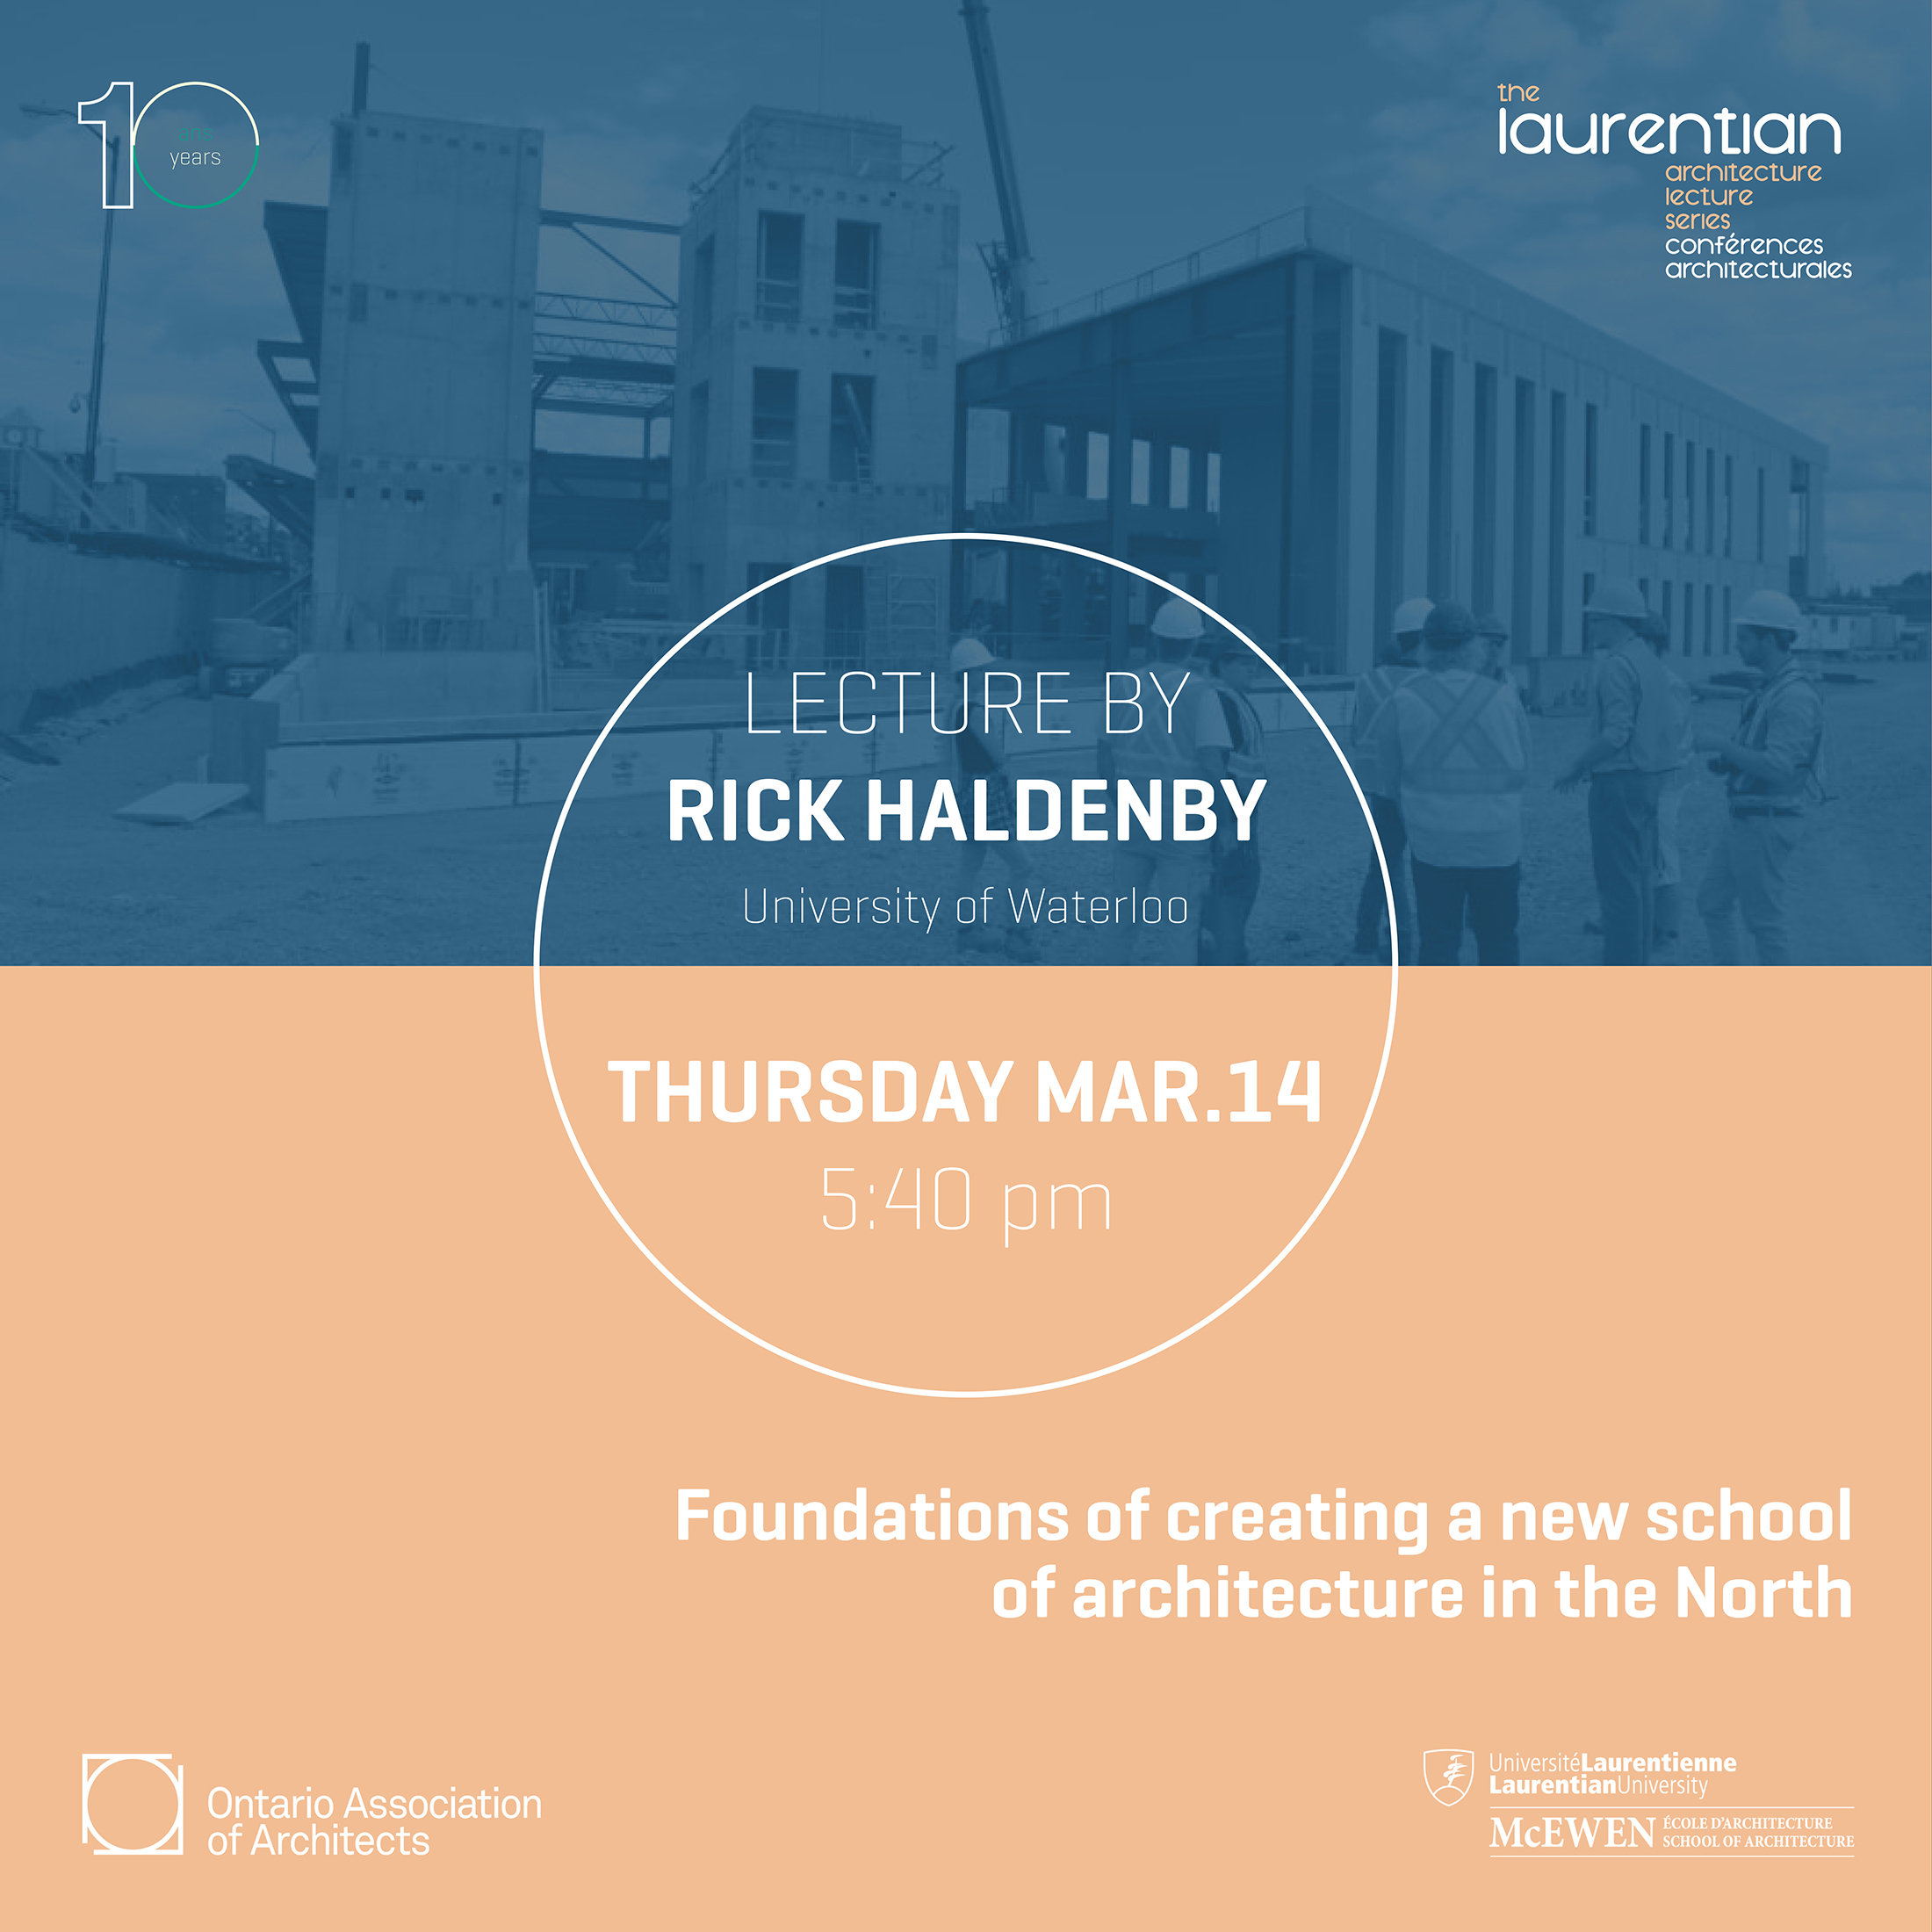 Poster of Lecture by Rick Haldenby on Thursday March 14 at 5:40 pm